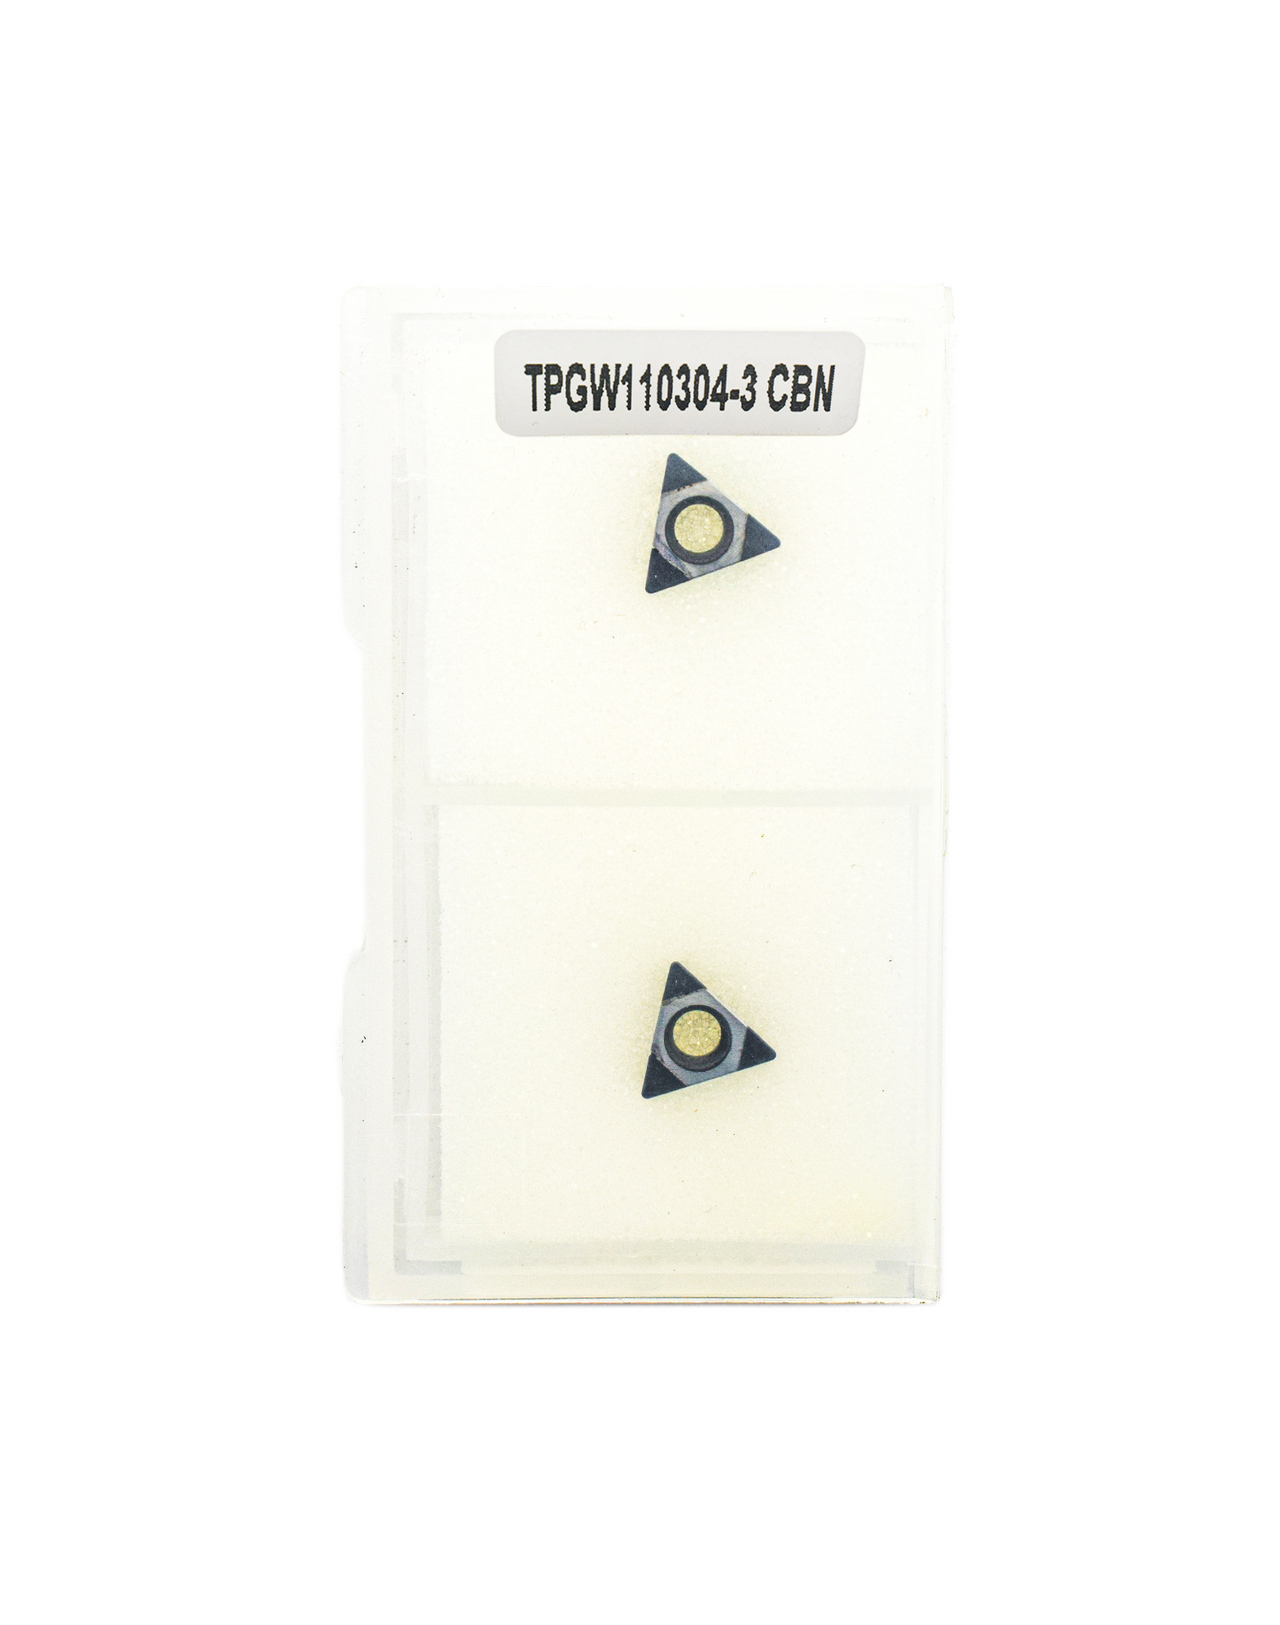 CBN TPGW110304 for HARDENED STEEL/CAST IRON machining pack of 2 inserts